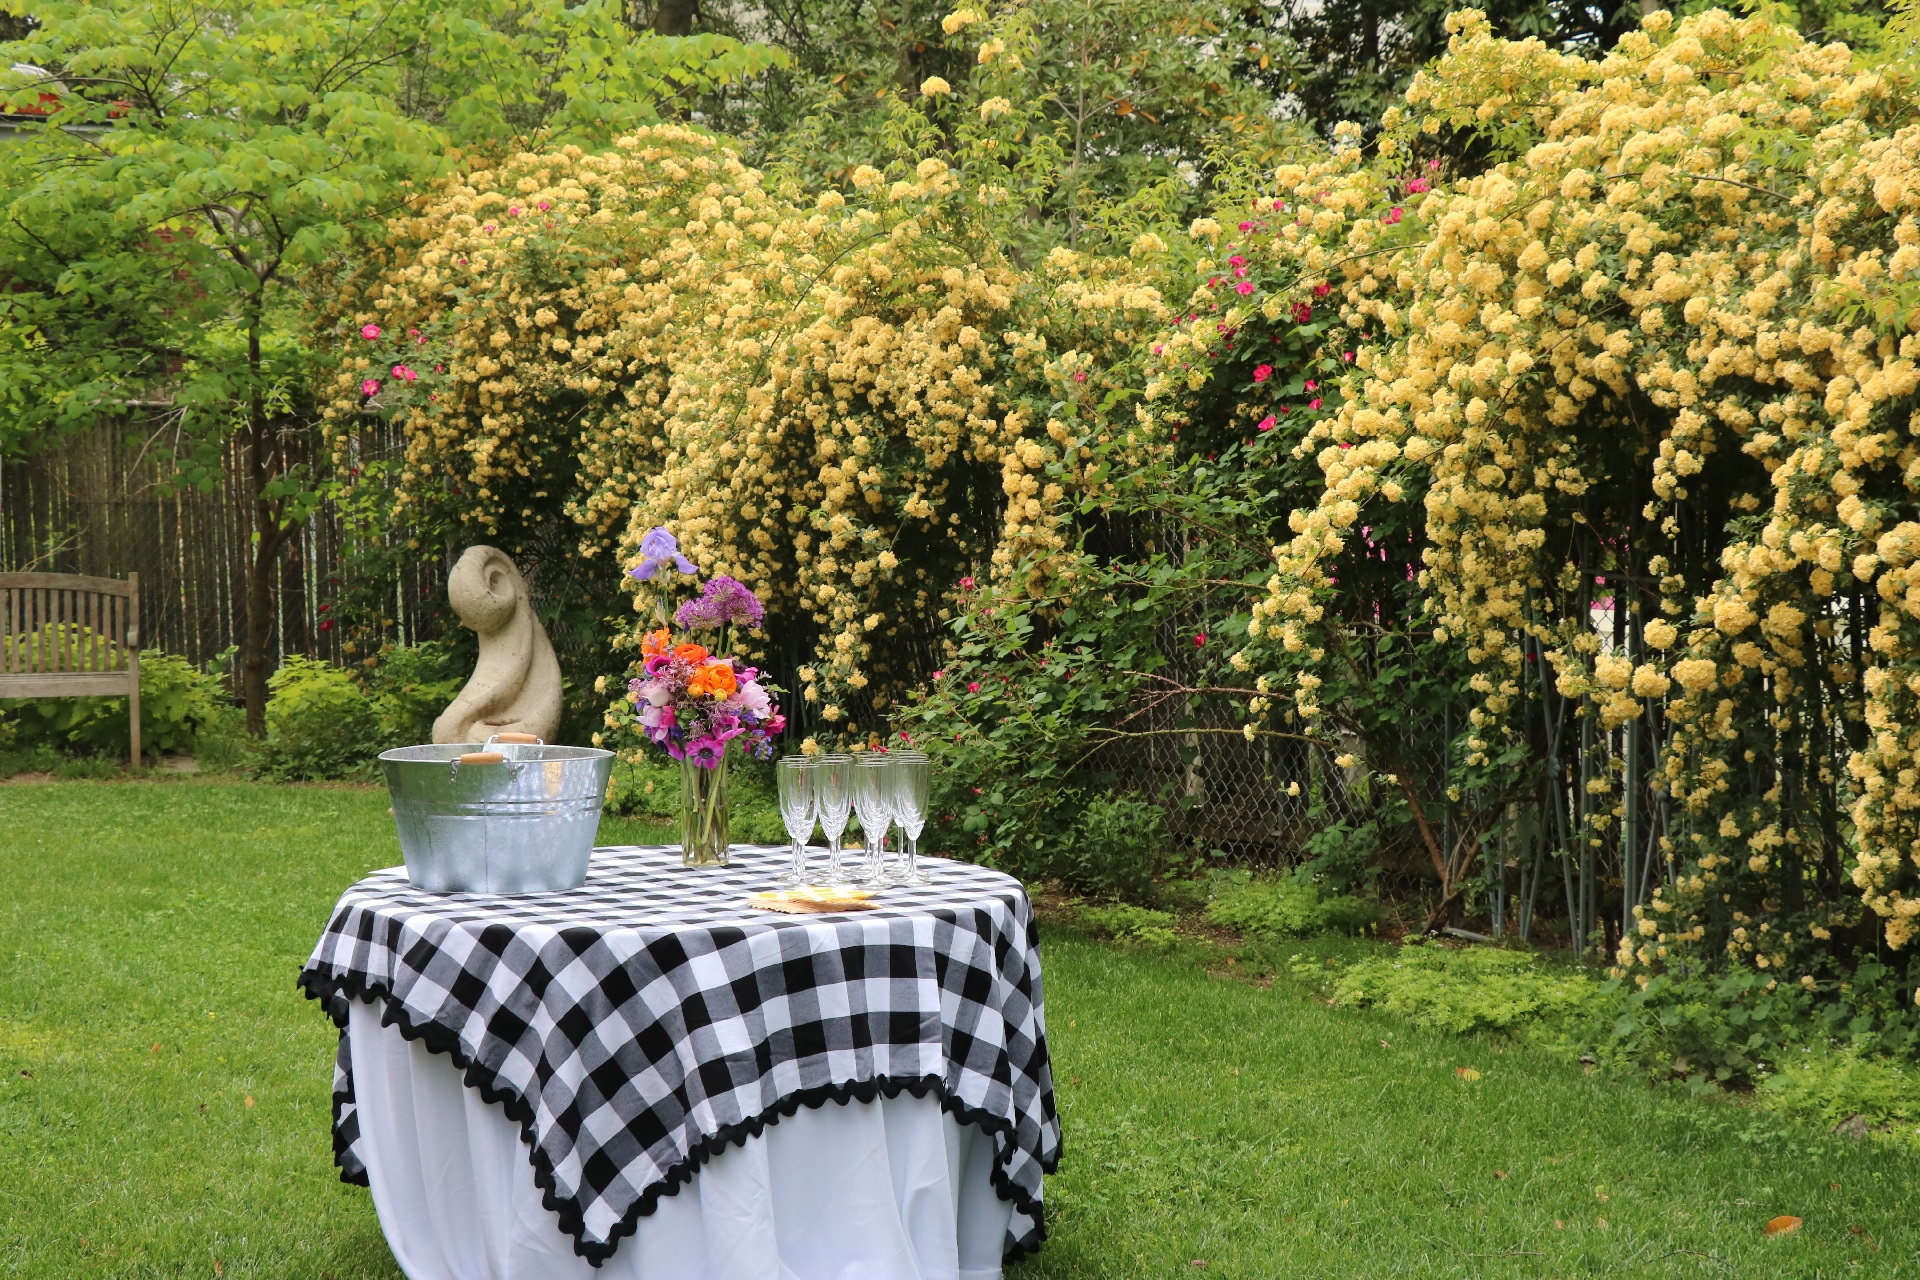 Champagne Glasses with Ice bucket filled with champage bottles on a table with white cloth and black and white checkered overlay - green grass with yellow lady roses to the right of the photo frame